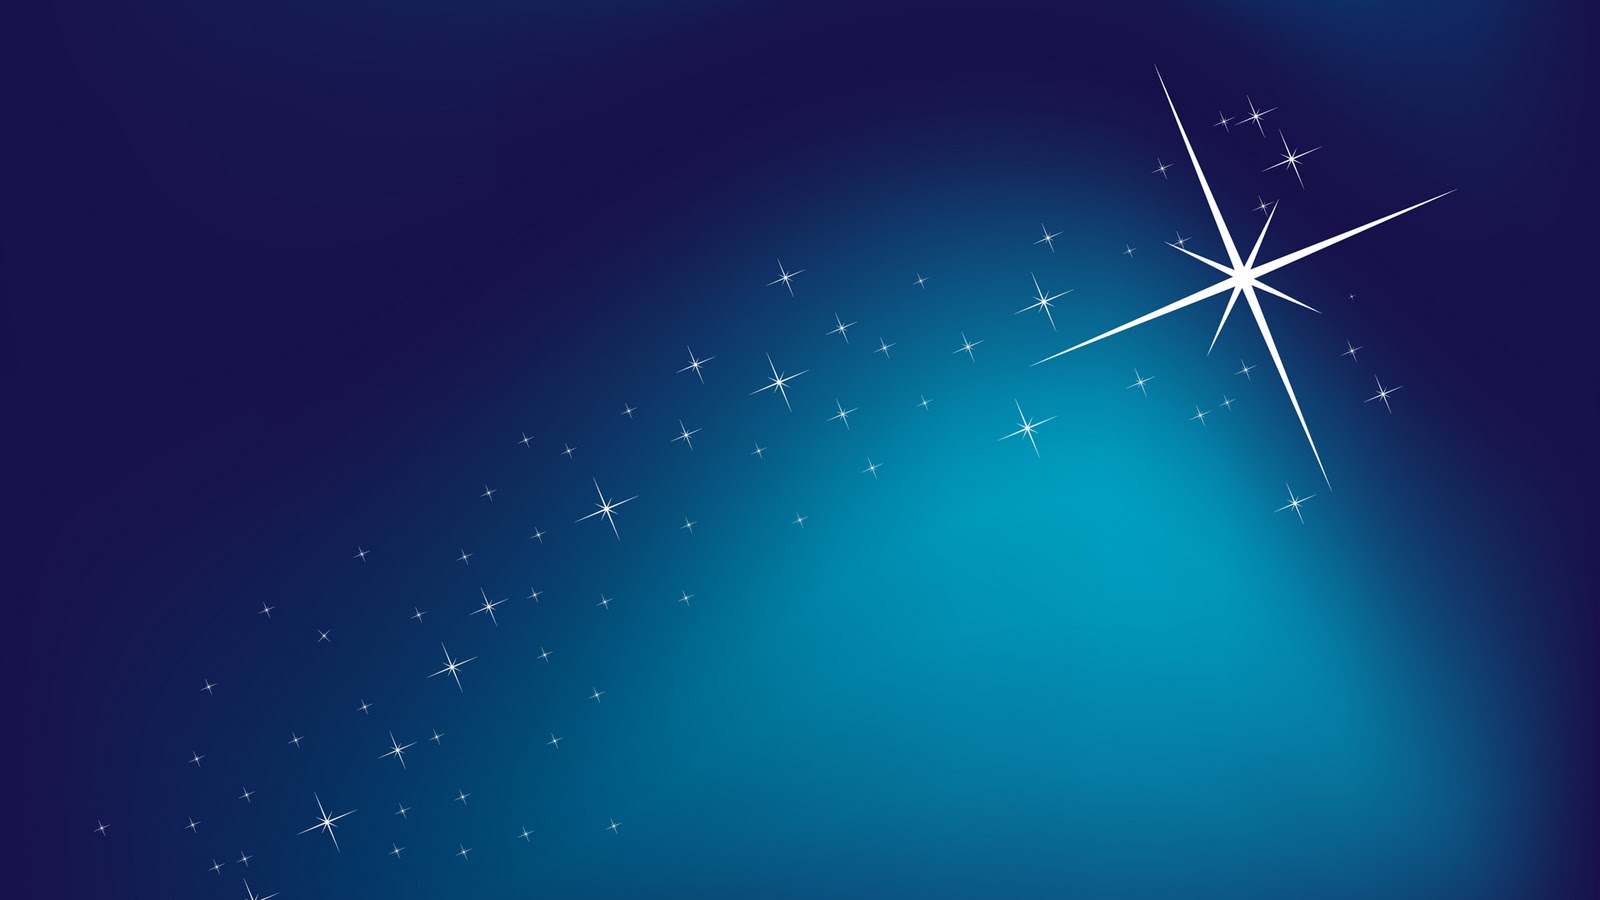 50+ Background of Christmas star images for your phone and desktop